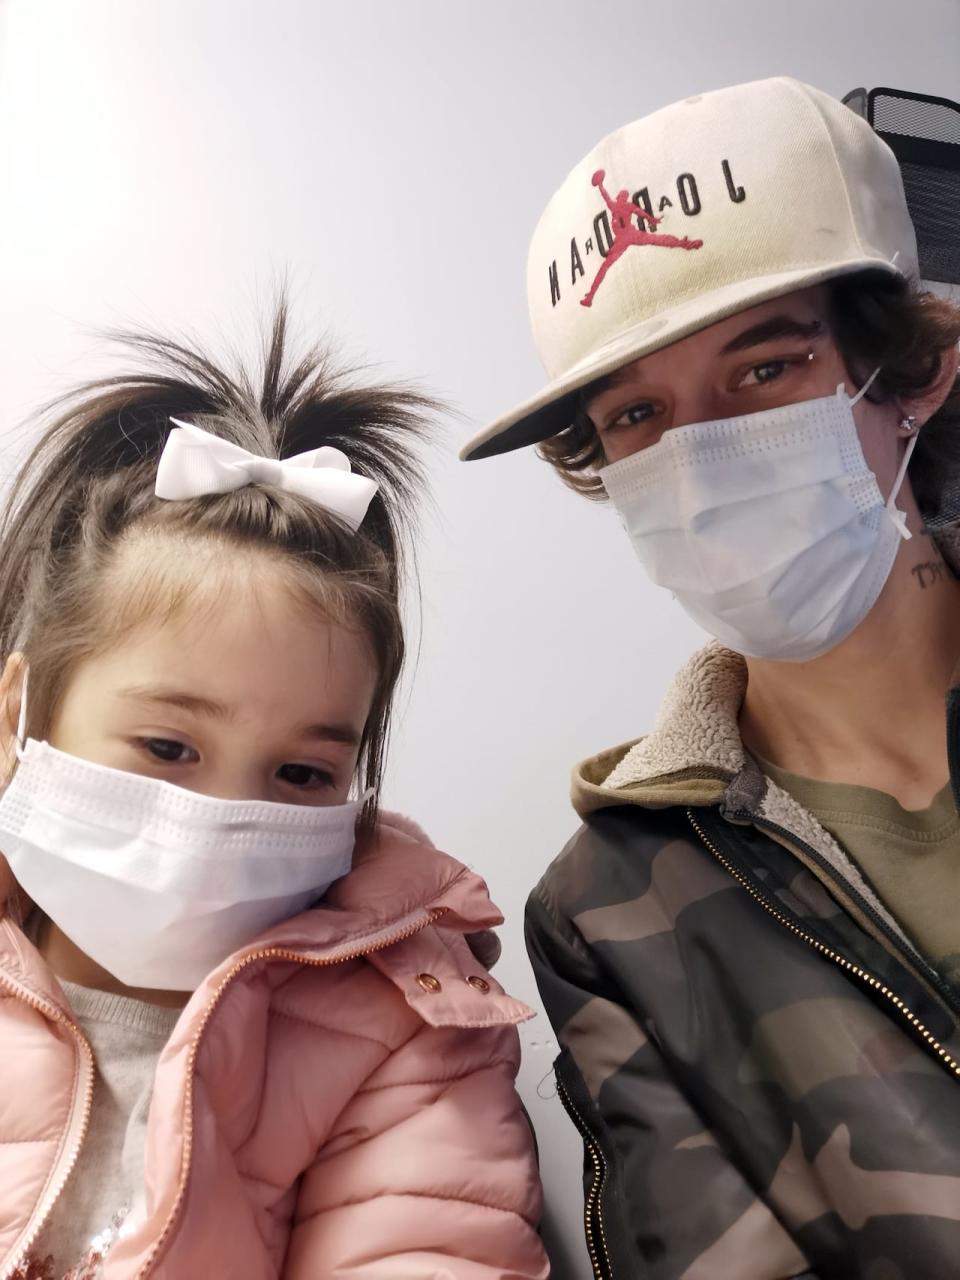 Chloe Guan-Branch, 4, next to Justin Cassie-Berube on Feb. 5, 2020. A judge ruled in March that Cassie-Berube, who was acting as Chloe's father, caused her death.